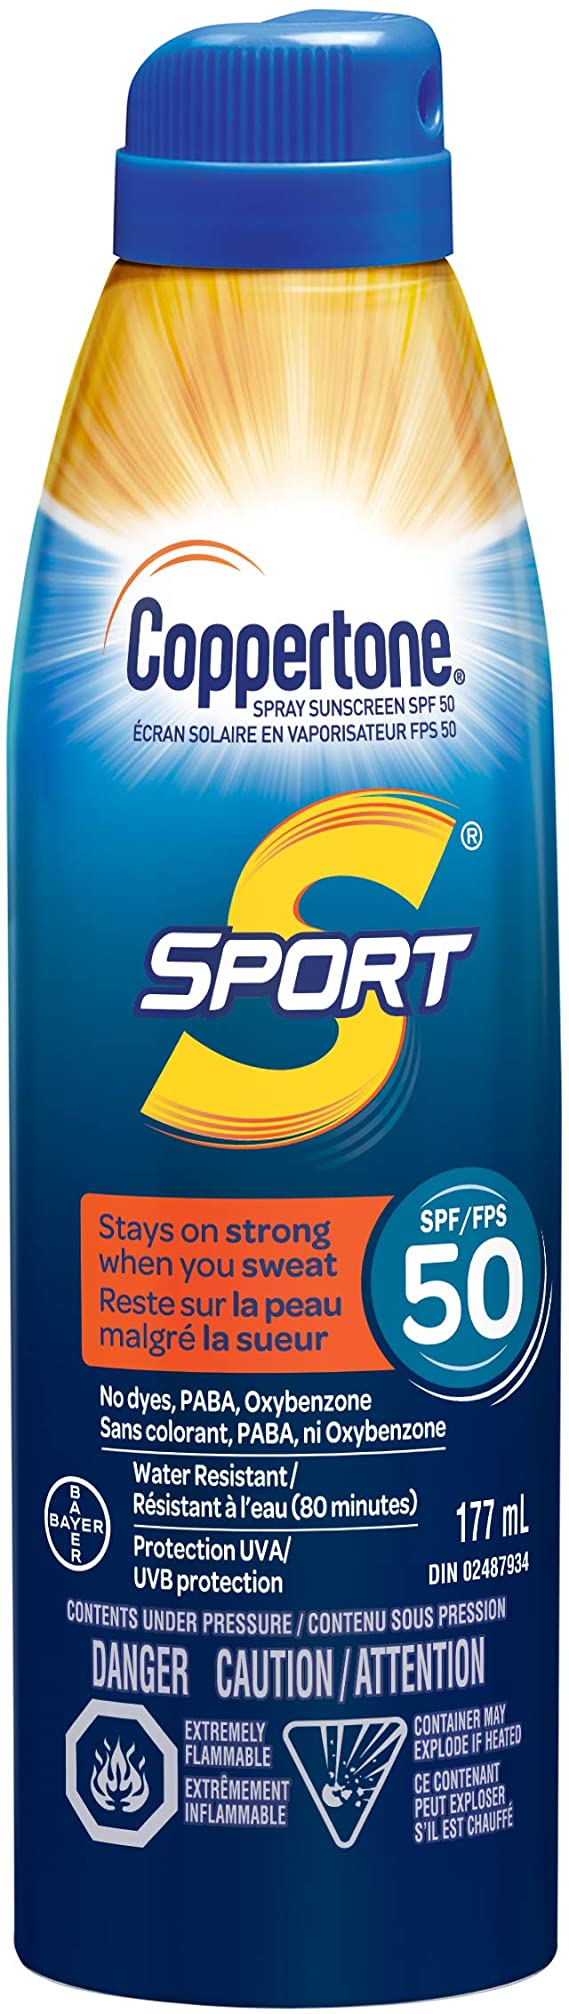 Coppertone Sport Continuous Spray Sunscreen Spf 50 for Broad Spectrum Protection Against Uva/uvb Rays for Active Adults, 177ml